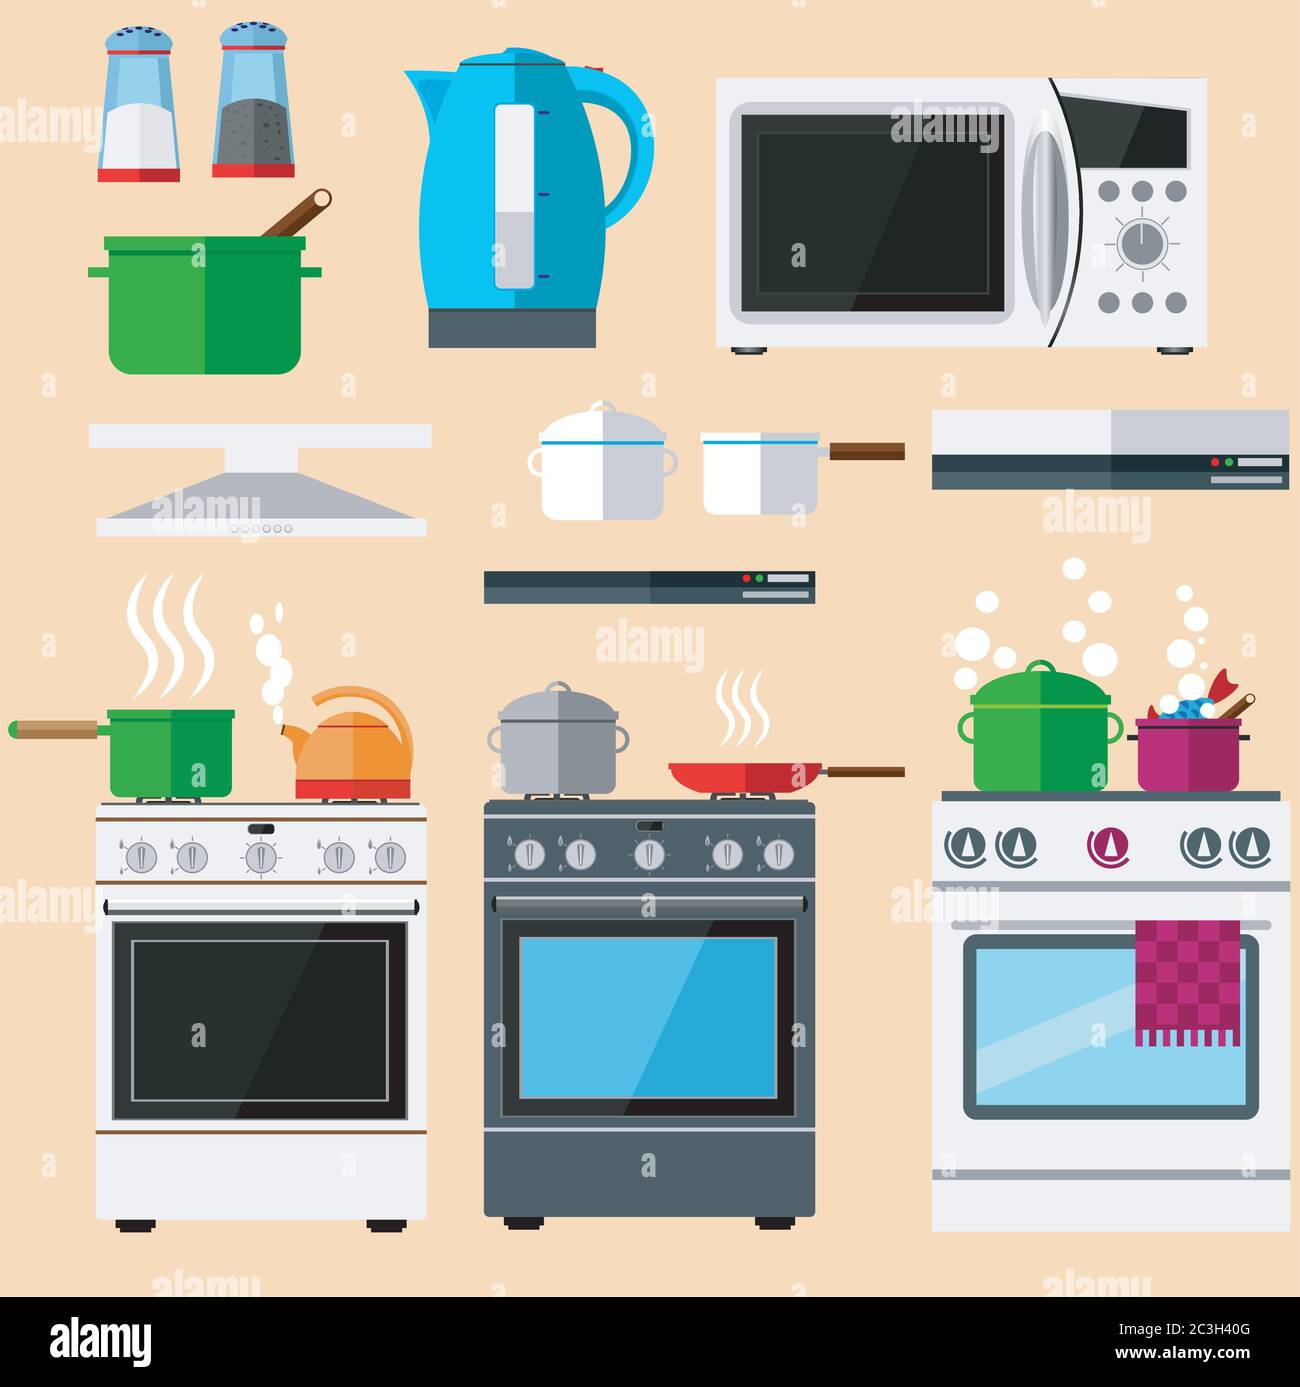 Set of kitchen appliances and utensils. Kitchen gas stoves, microwave and pots. Vector illustration. Stock Vector